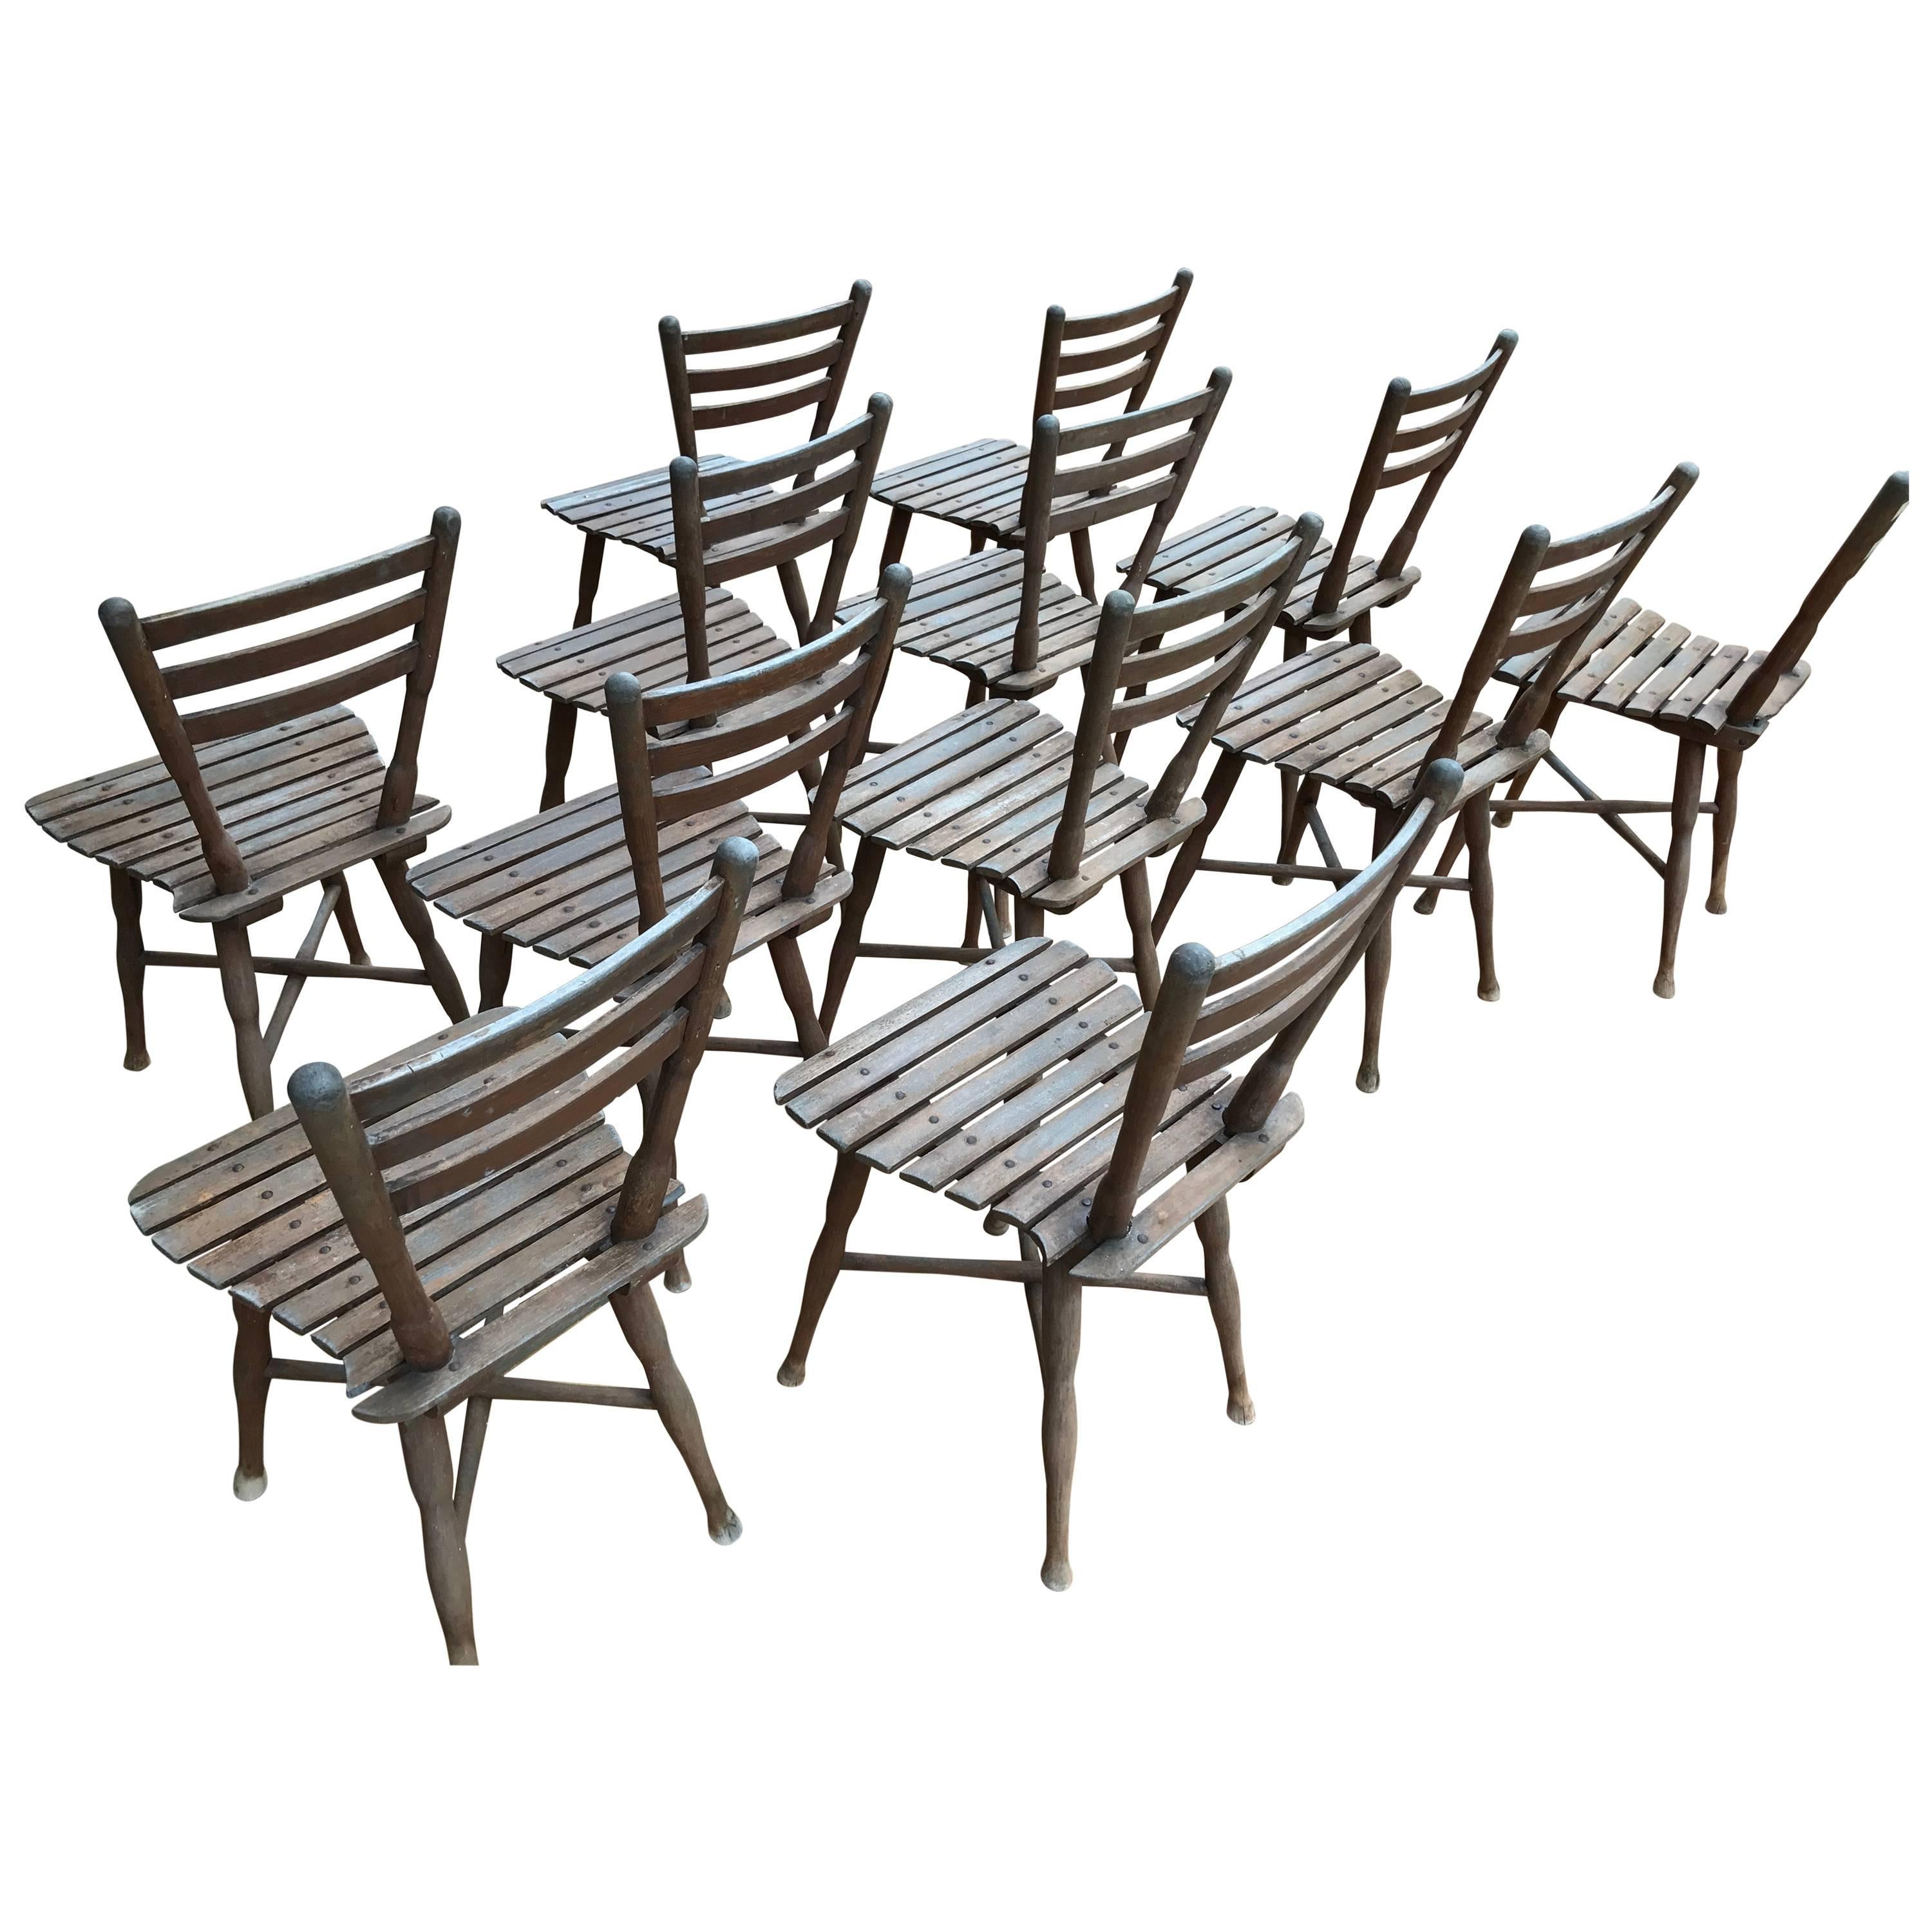 12 Garden Chairs by Thonet bentwood  1904 Nr 8, 5 Beech Nice Rare Collection